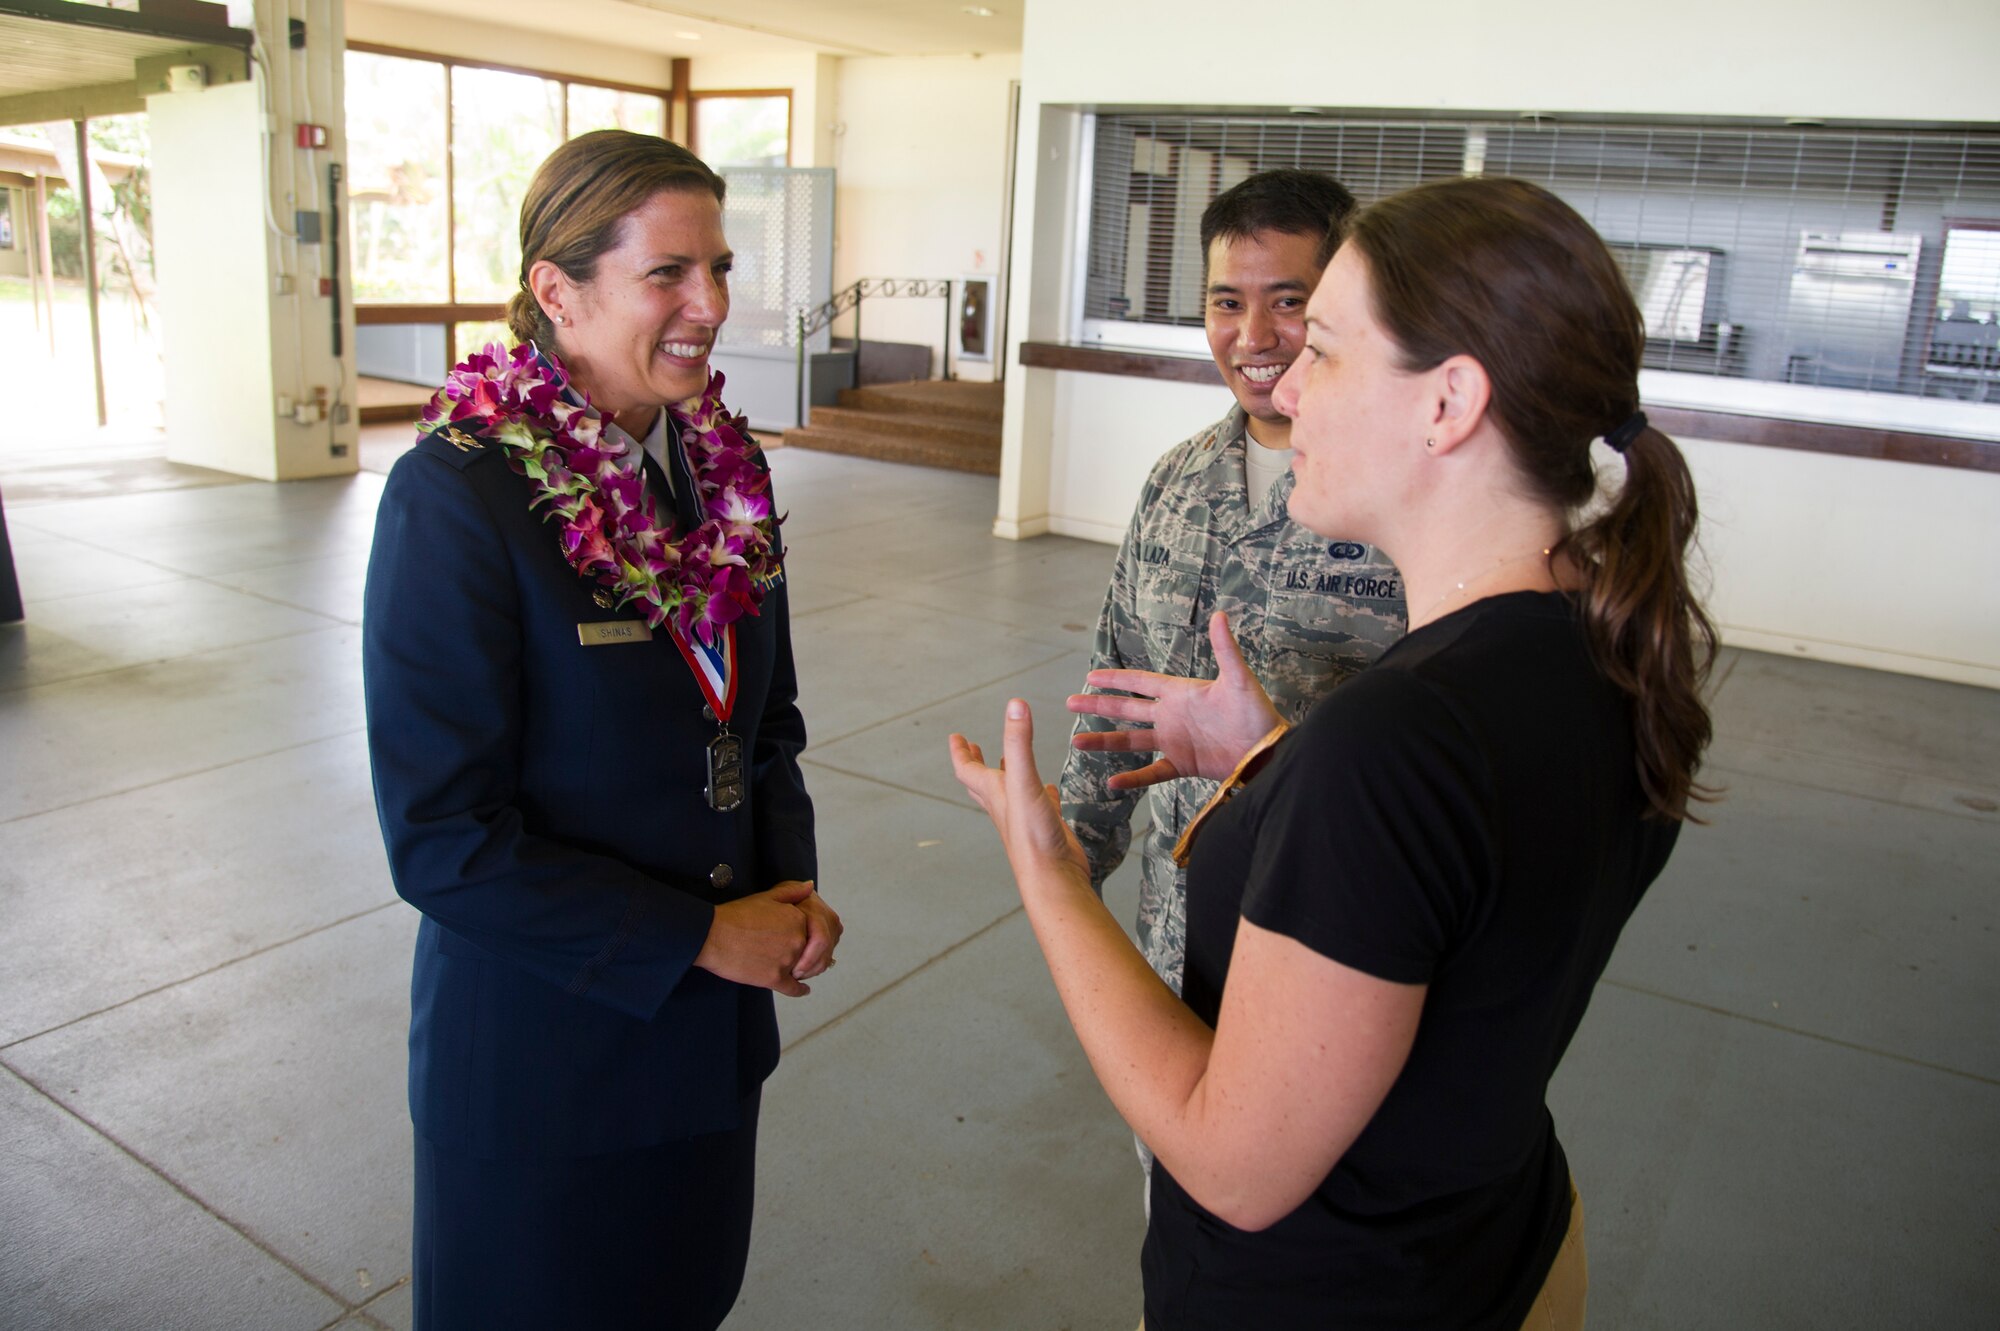 U.S. Air Force Col. Athanasia Shinas speaks with Maj. Elbert Laza and his wife, Christine Walters, following the 624th Regional Support Group assumption of command ceremony at Joint Base Pearl Harbor-Hickam, Hawaii, July 7, 2018.